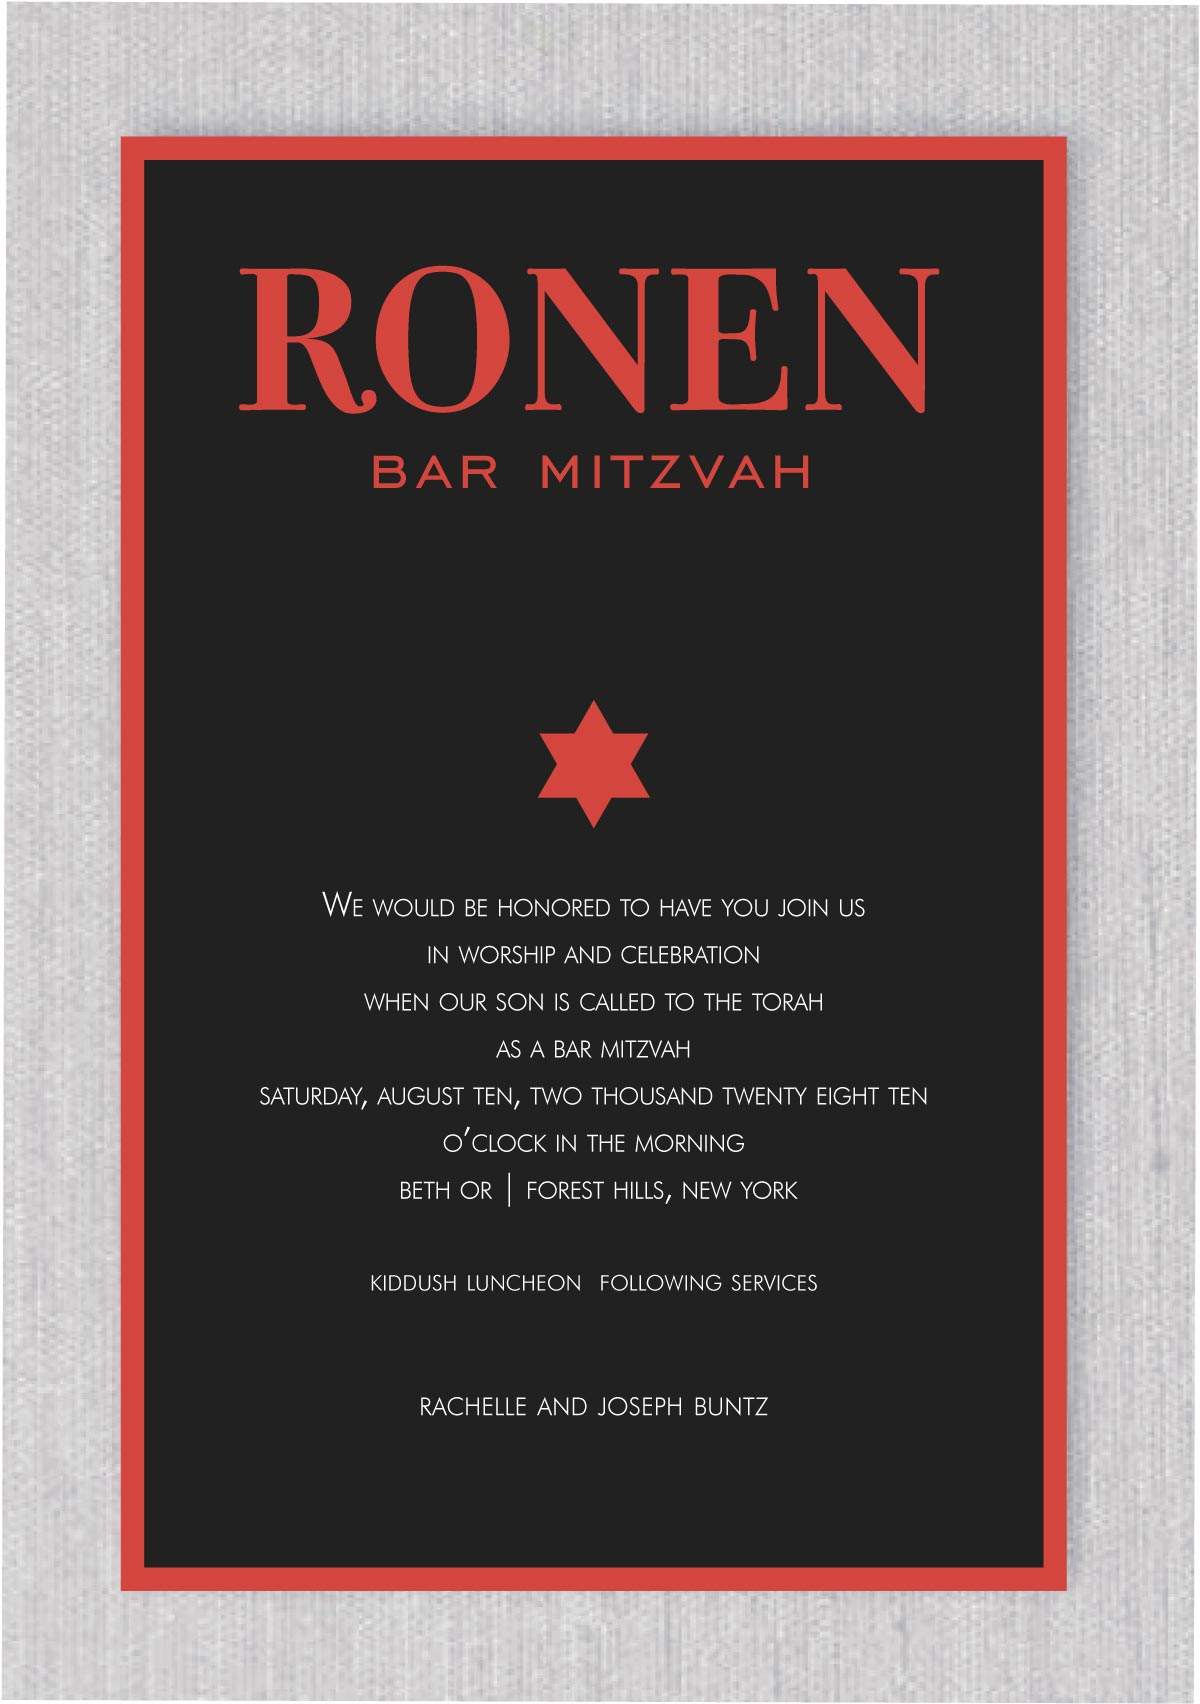 Our Modern Black, Red and White Bar Mitzvah Invitation is perfect for those looking for a sleek and bold design. The black background provides a sophisticated and elegant touch, while the bold big letters in red make a powerful statement. The  Modern Black, Red and White Bar Mitzvah invitation will definitely catch the eye of your guests and will set the tone for your event.